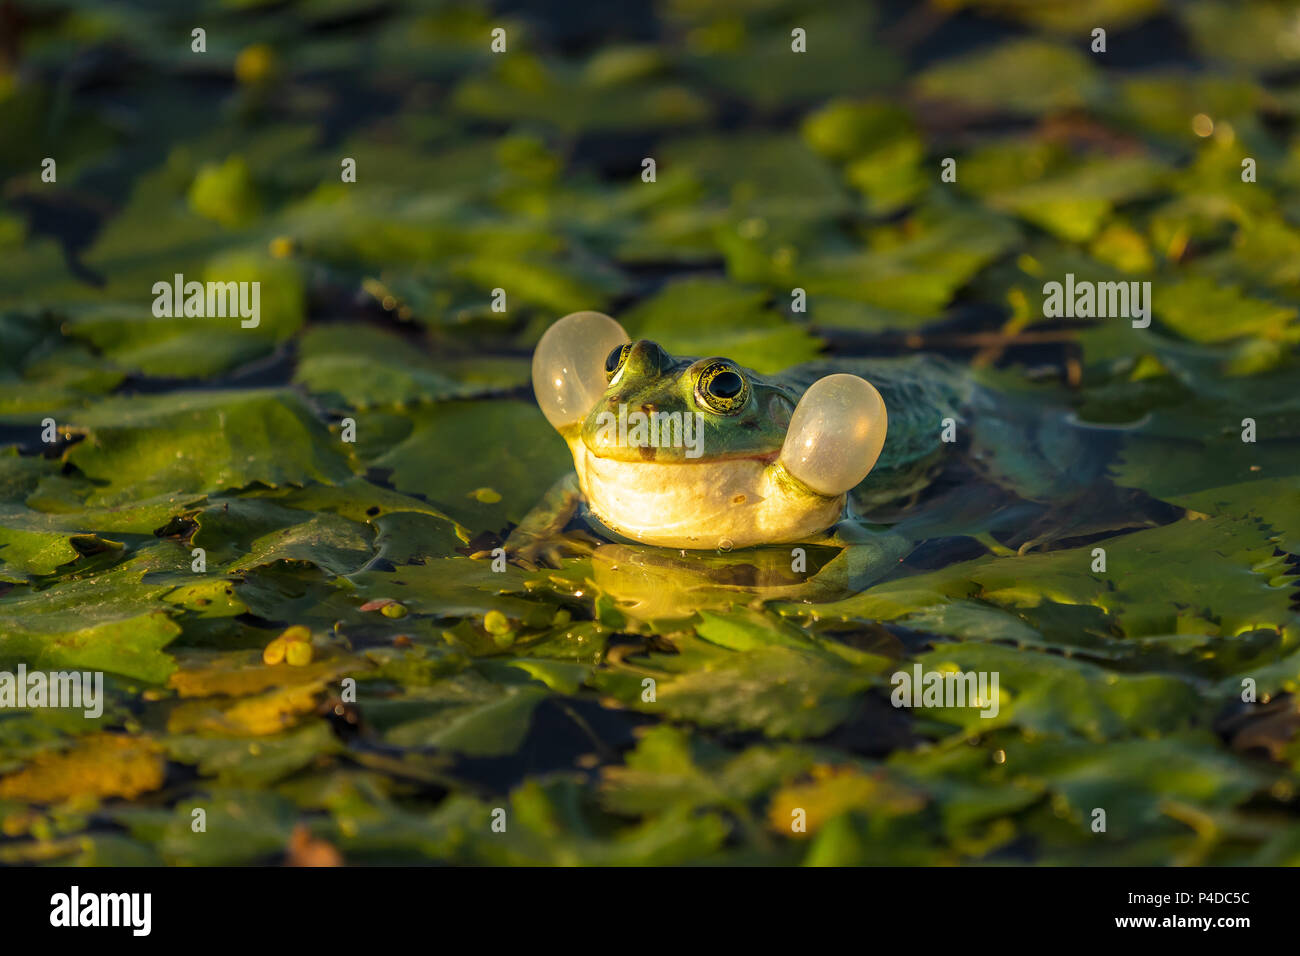 The common Green Frog (Lake Frog or Water Frog) in the water in Danube  Delta. Closeup frog photography at sunrise Stock Photo - Alamy